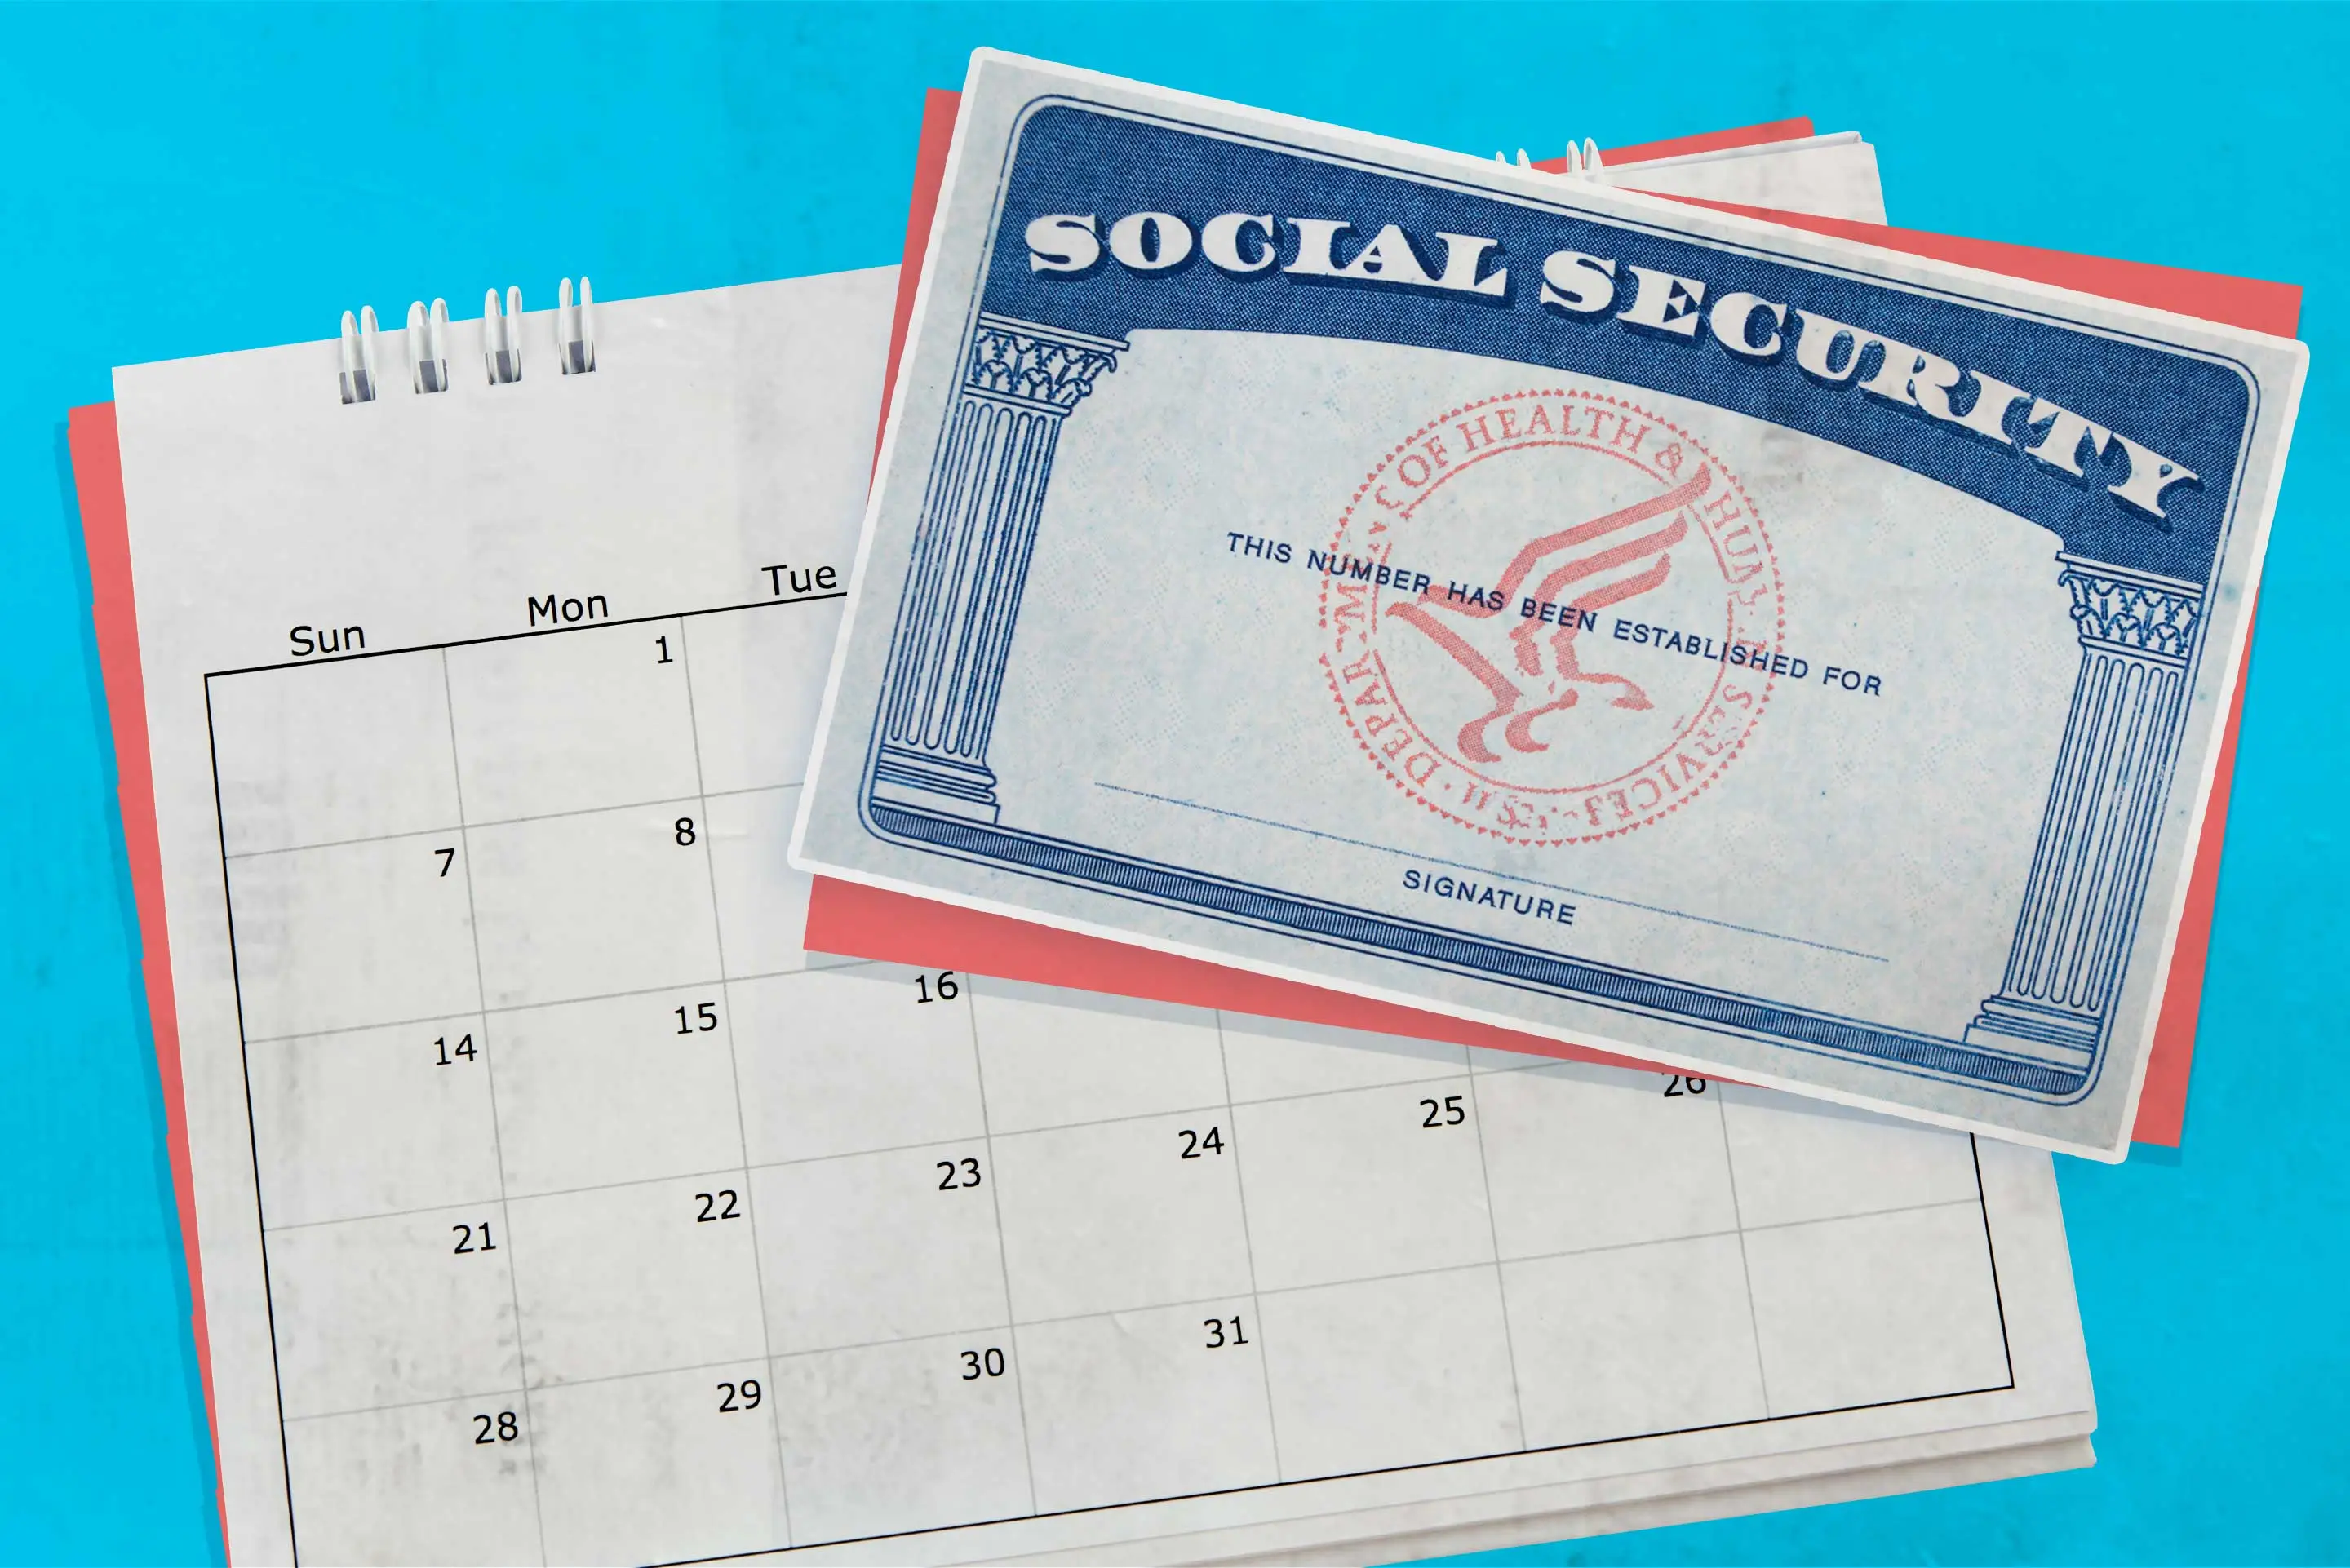 The Date Social Security Will Run Out of Money Just Changed